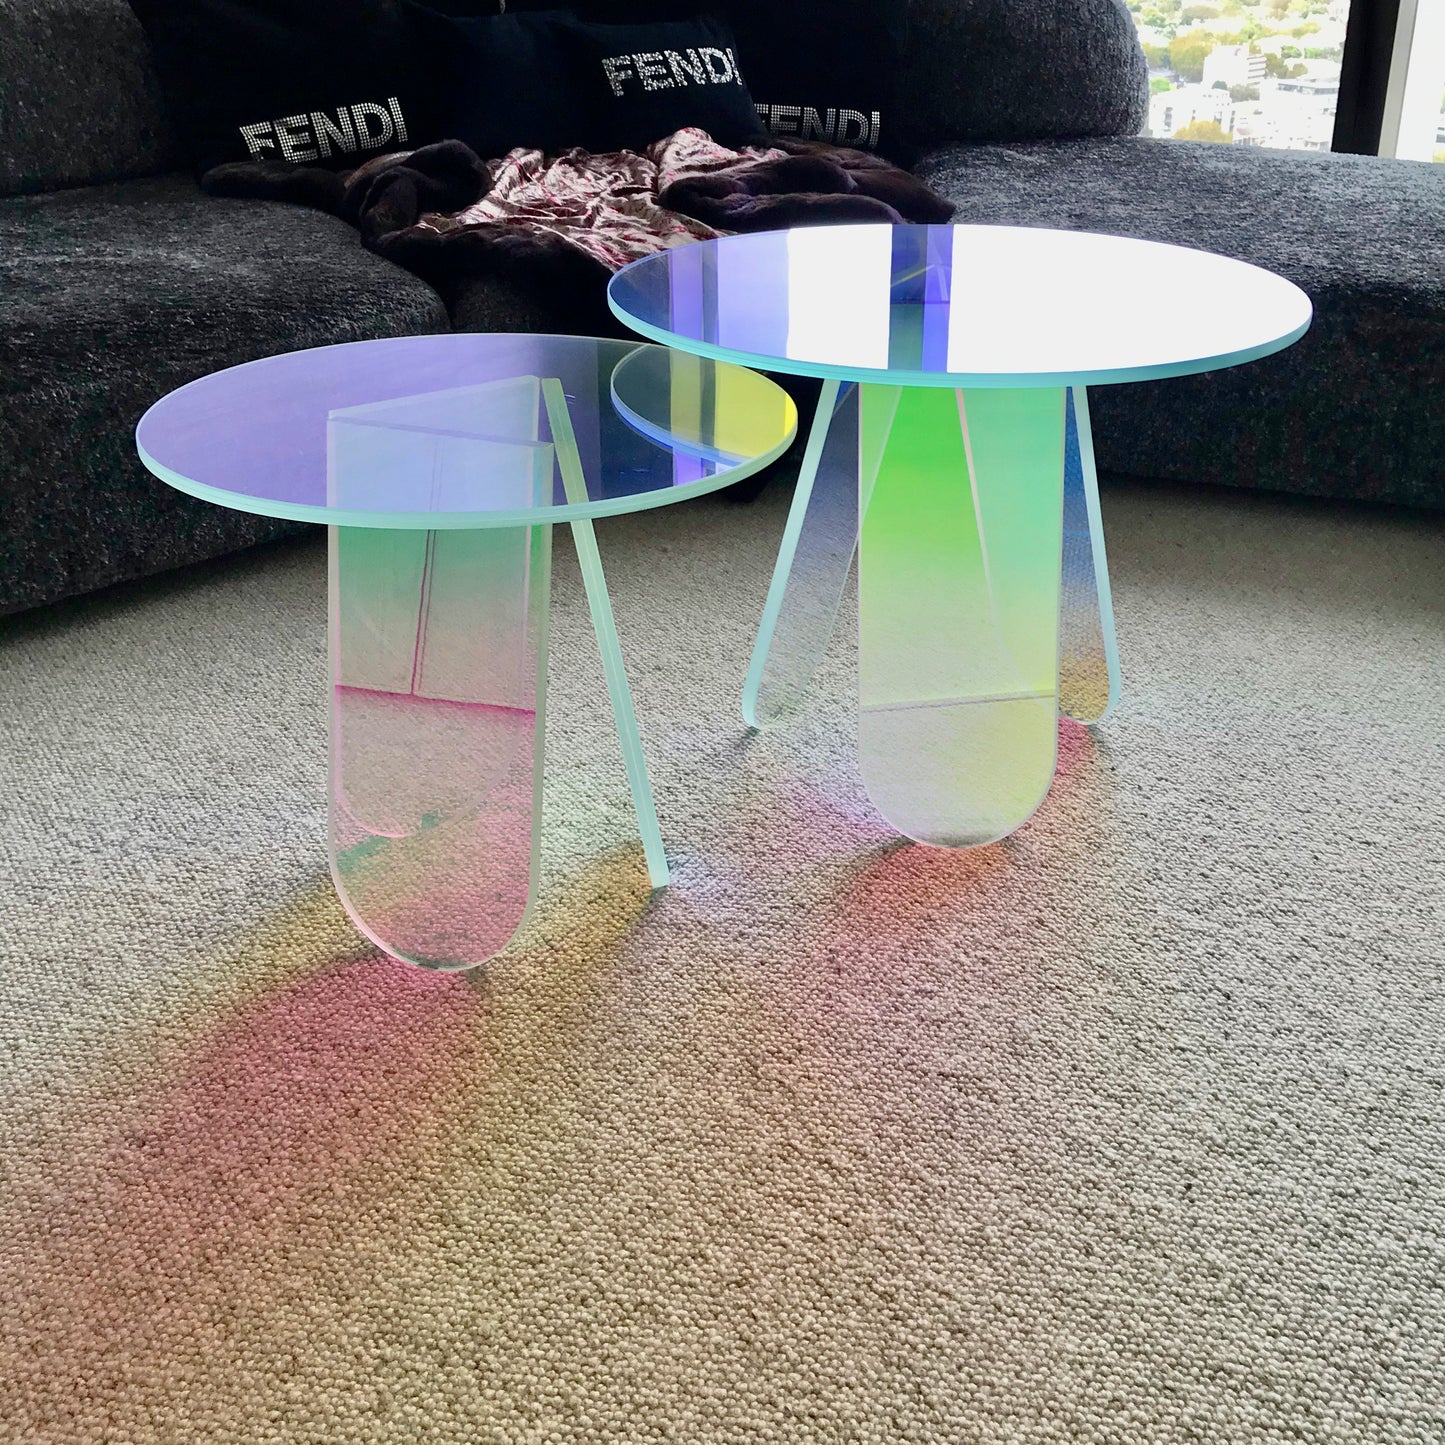 Sold at Auction: Patricia Urquiola, PATRICIA URQUIOLA Low table 'Crossing'  collection for Italy Glas